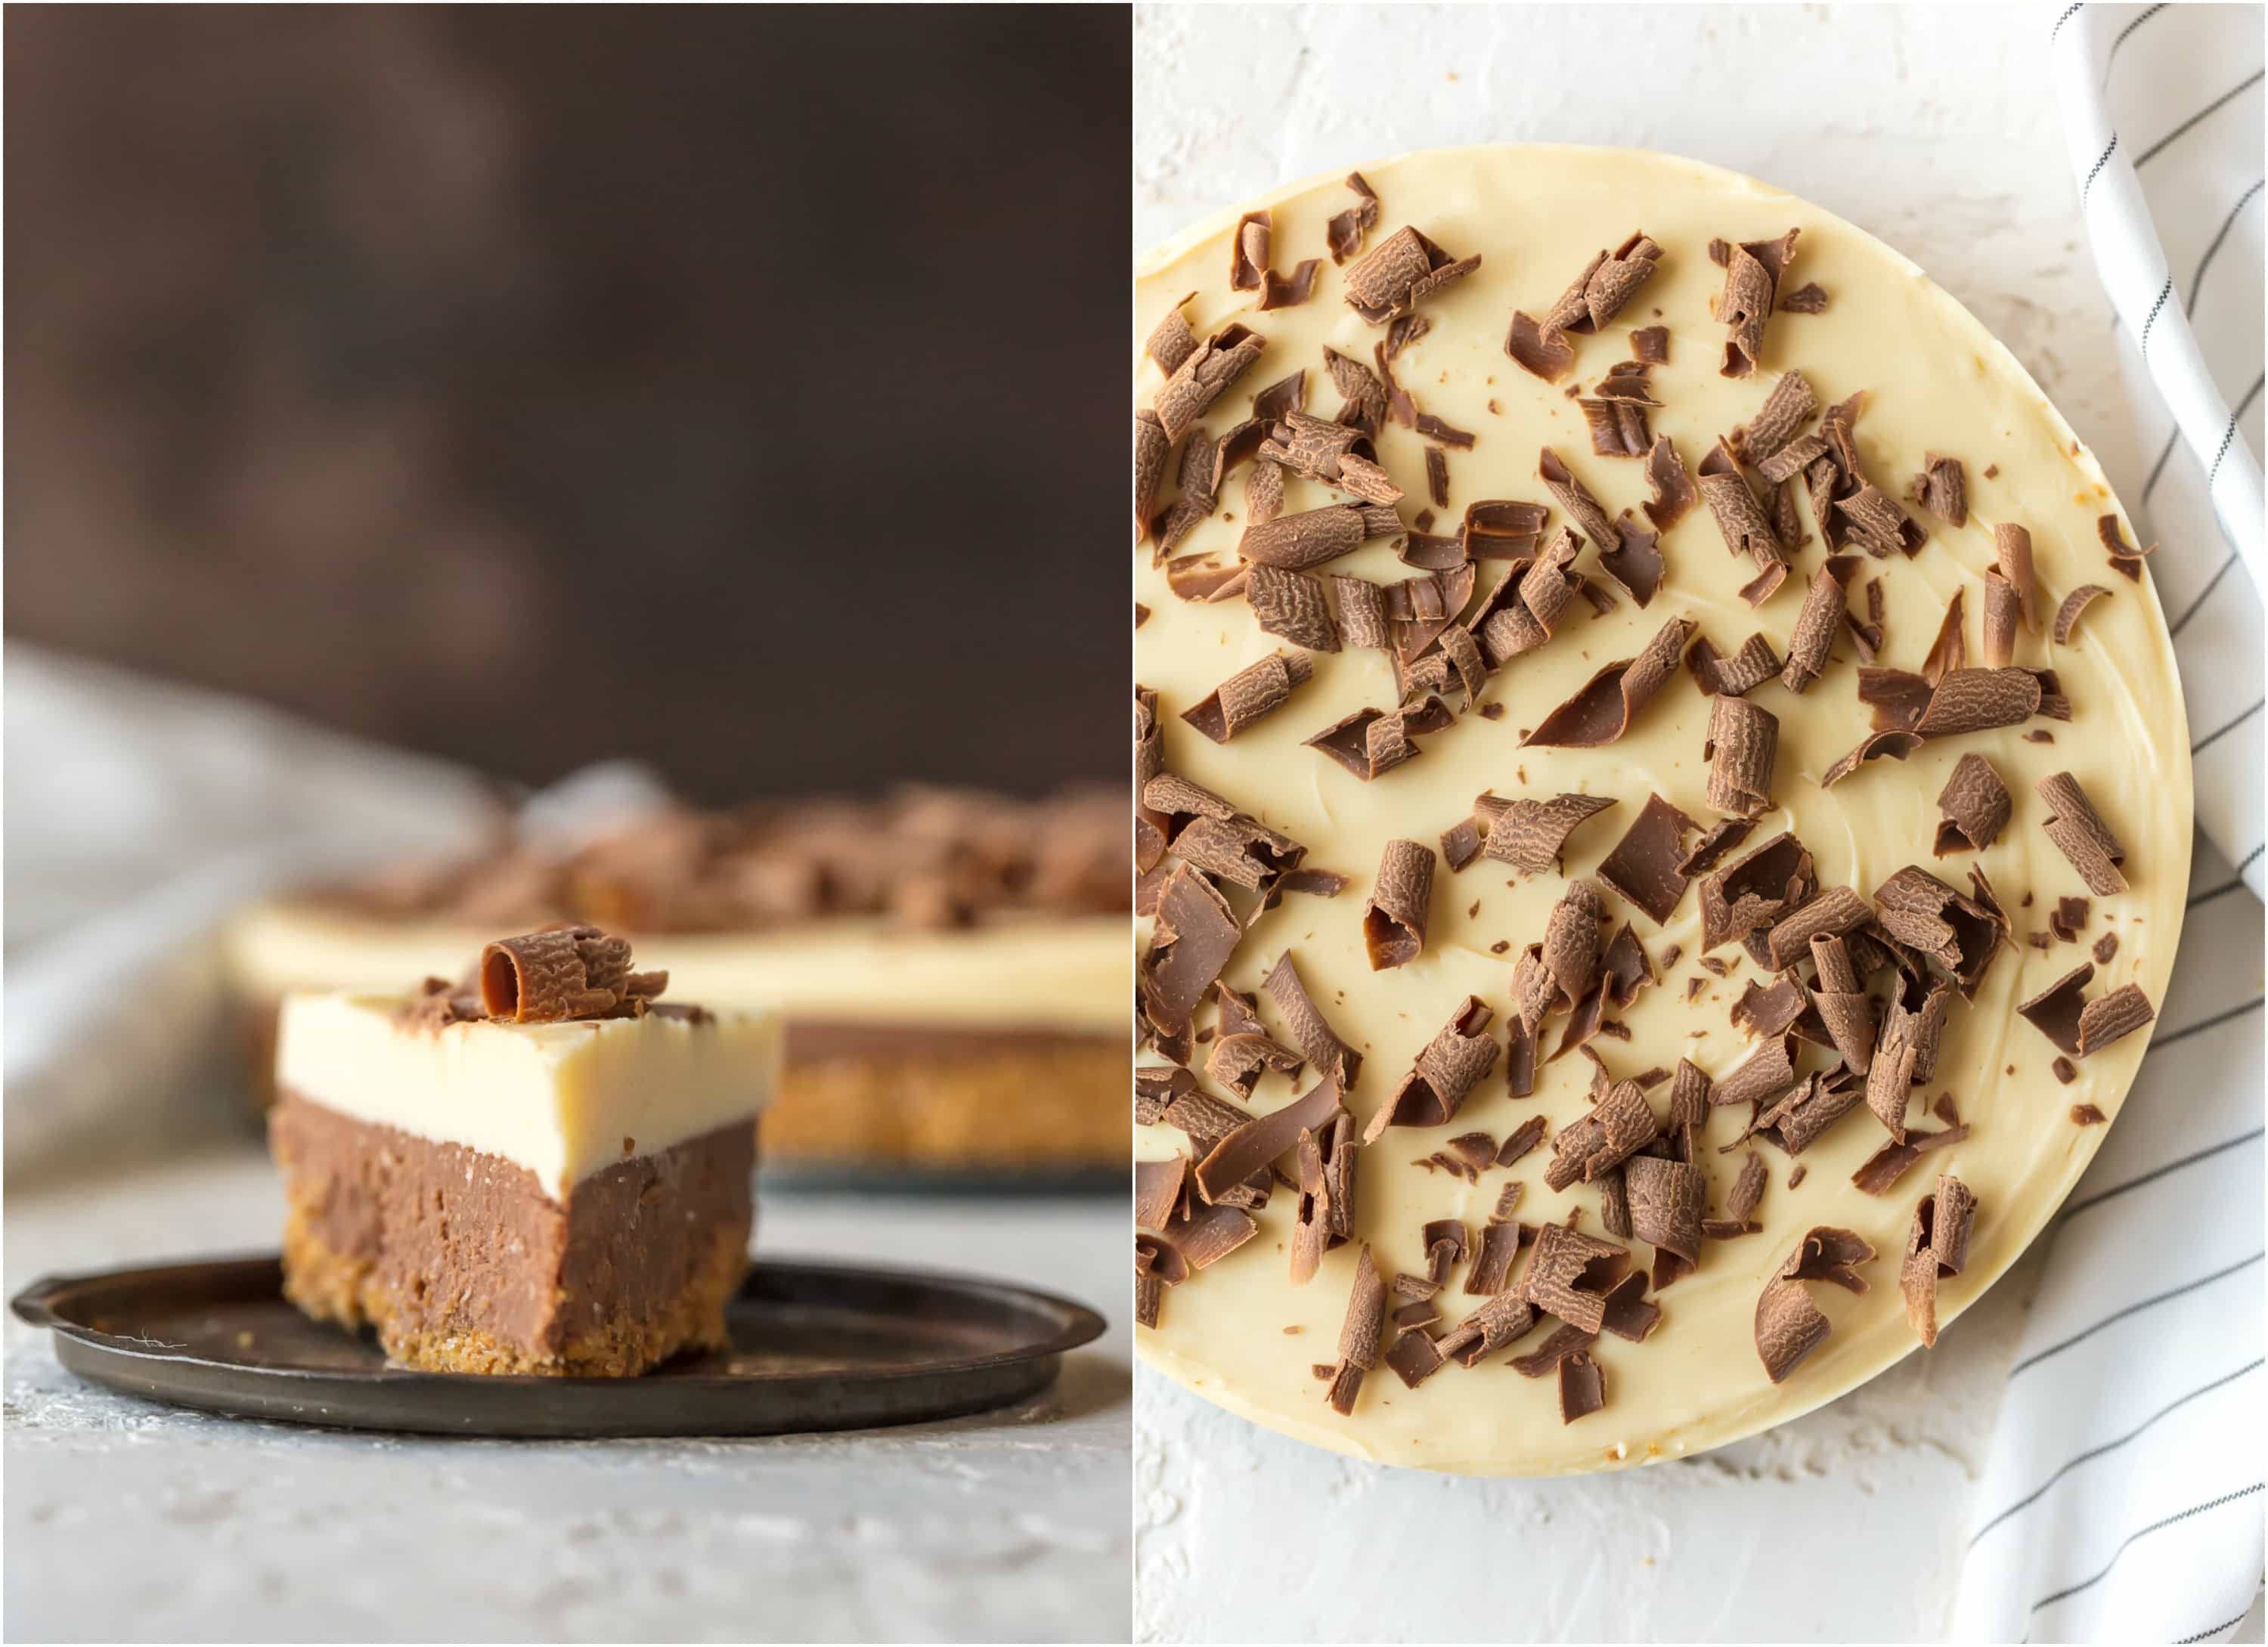 FRENCH SILK PIE FUDGE is an absolute must make for Christmas! This cute and creative fudge is delicious, easy, and fun! Wow your holiday guests with this adorable twist on a holiday classic.